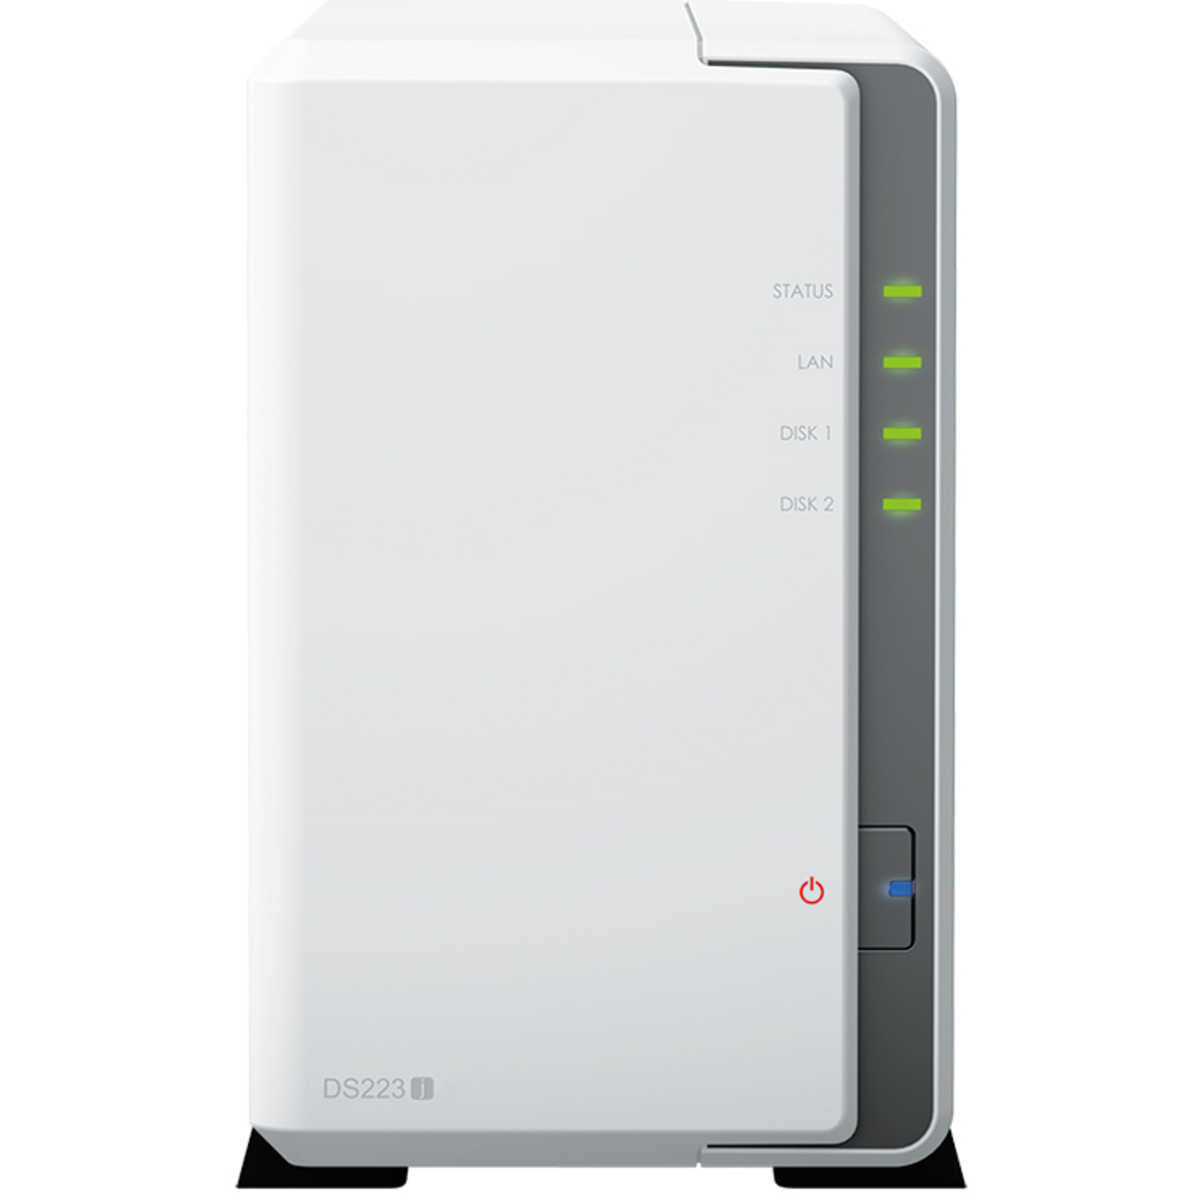 Synology DiskStation DS223j 40tb 2-Bay Desktop Personal / Basic Home / Small Office NAS - Network Attached Storage Device 2x20tb Toshiba Enterprise Capacity MG10ACA20TE 3.5 7200rpm SATA 6Gb/s HDD ENTERPRISE Class Drives Installed - Burn-In Tested DiskStation DS223j